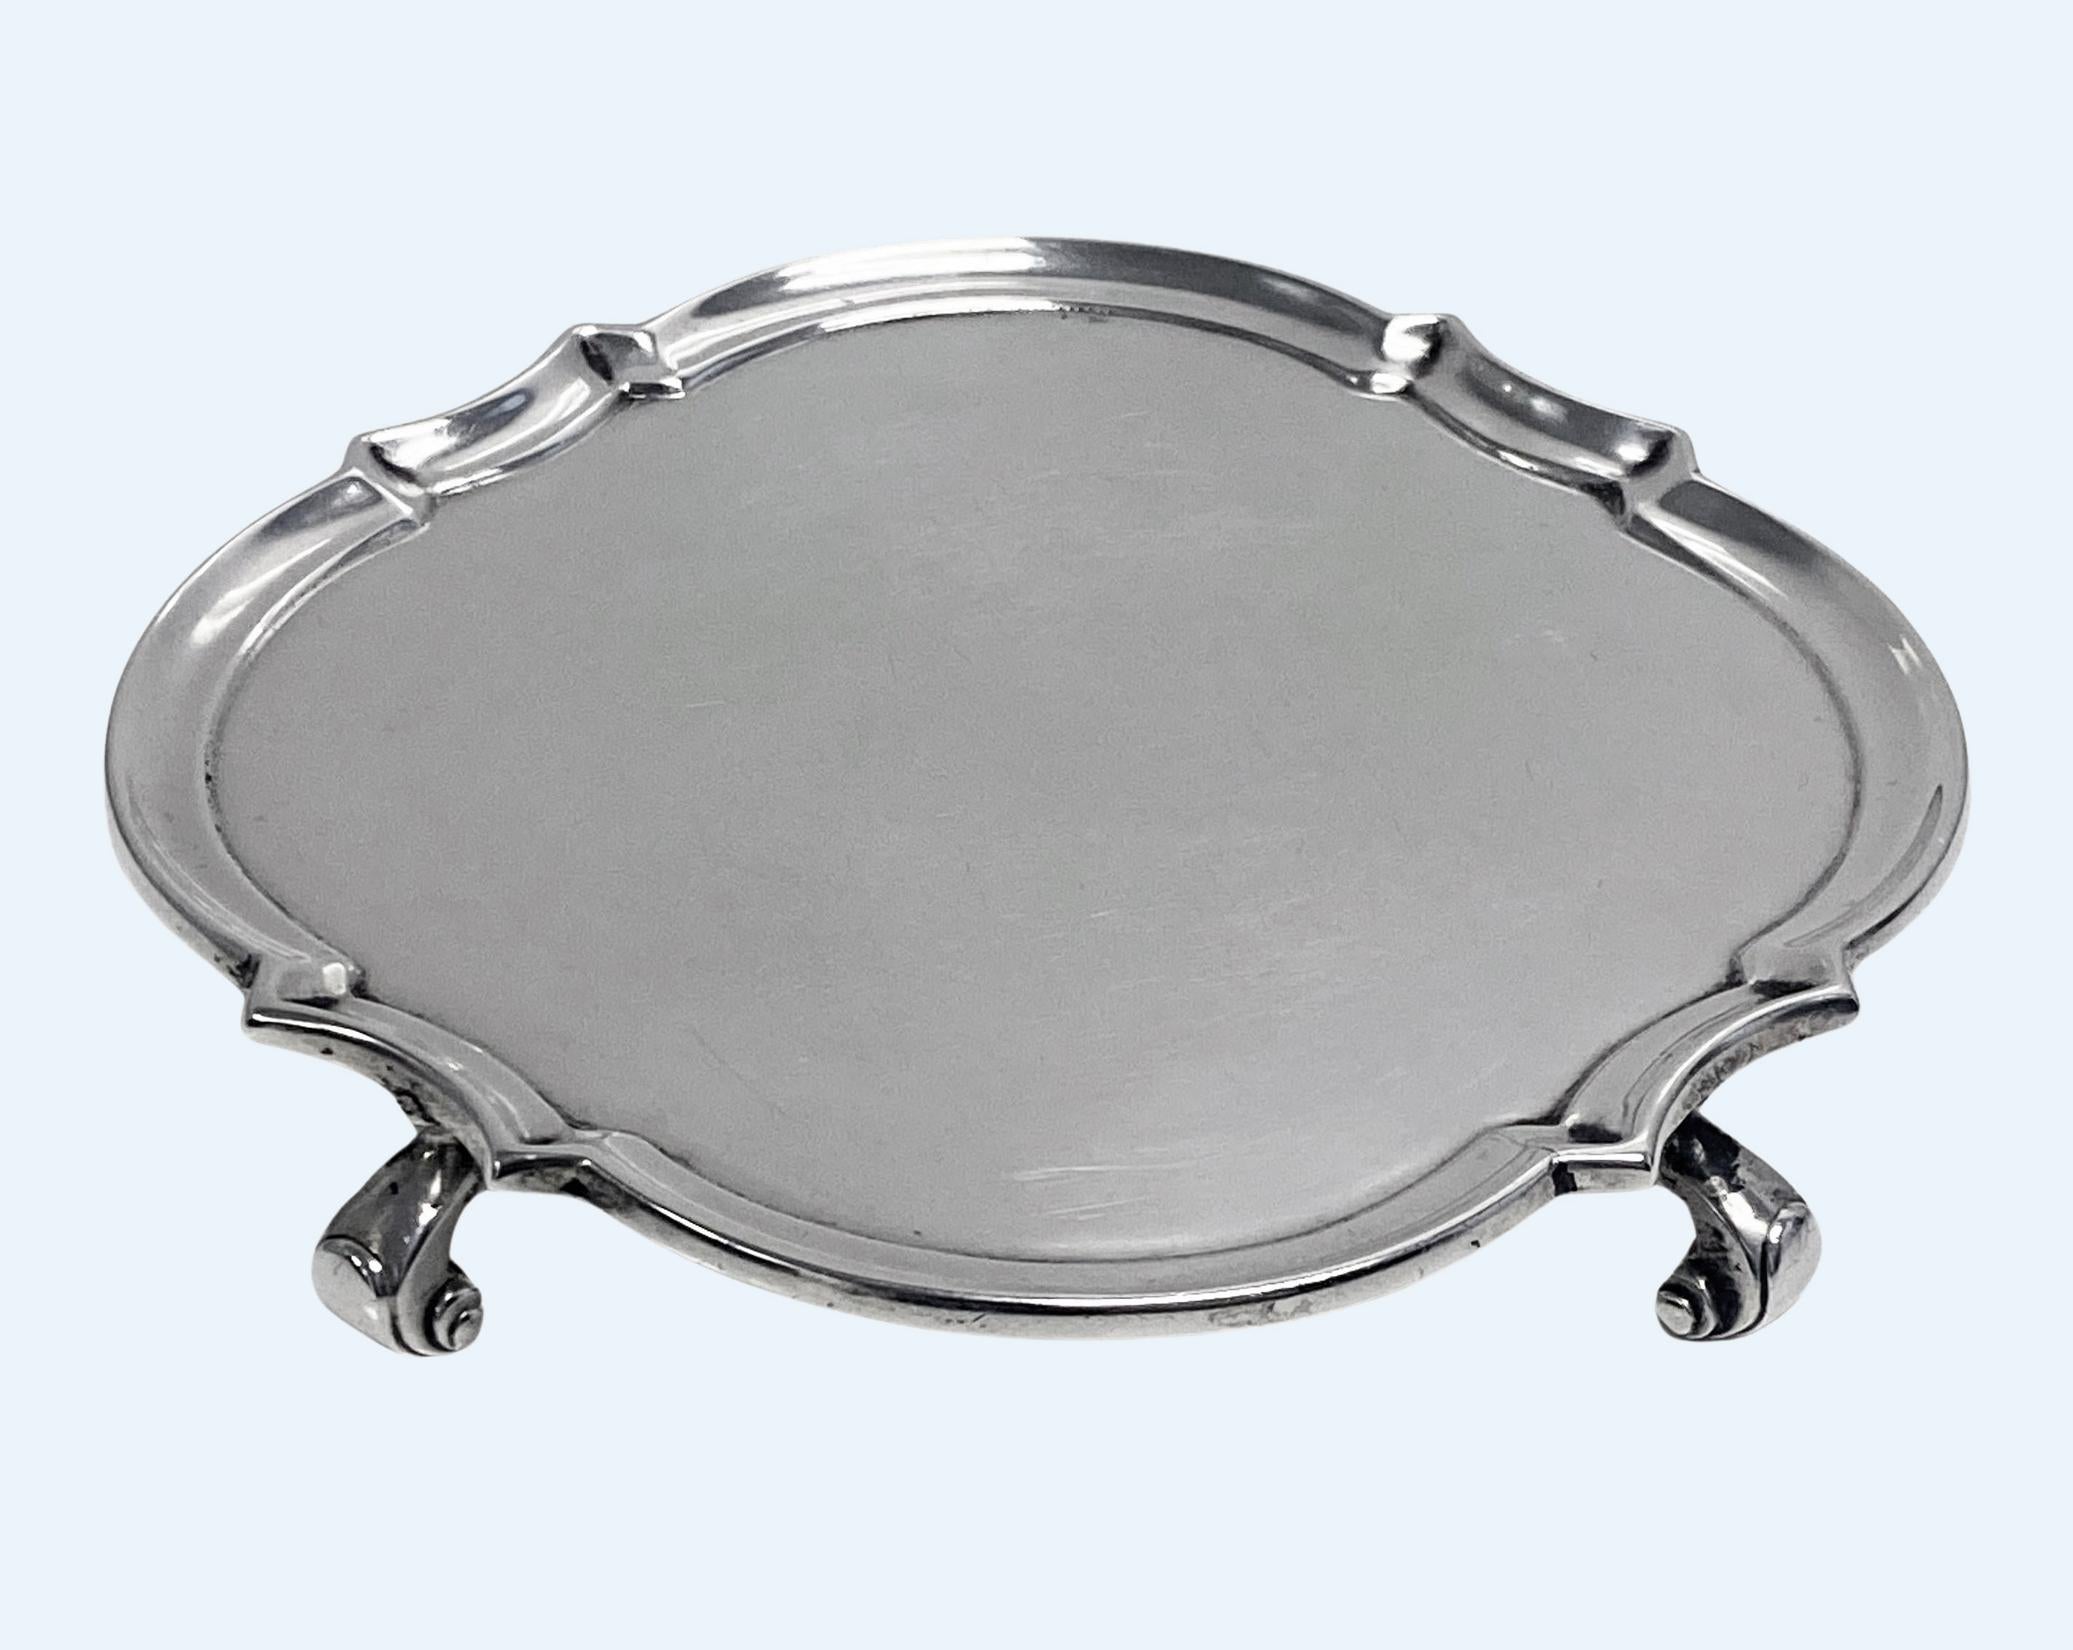 Antique English Britannia Standard (0.950) Silver Salver Tray, Crichton London 1923. The square shaped salver on four turned supports, plain center, molded shaped border. Full Britannia Standard hallmarks for London 1923 by Crichton. Diameter: 6